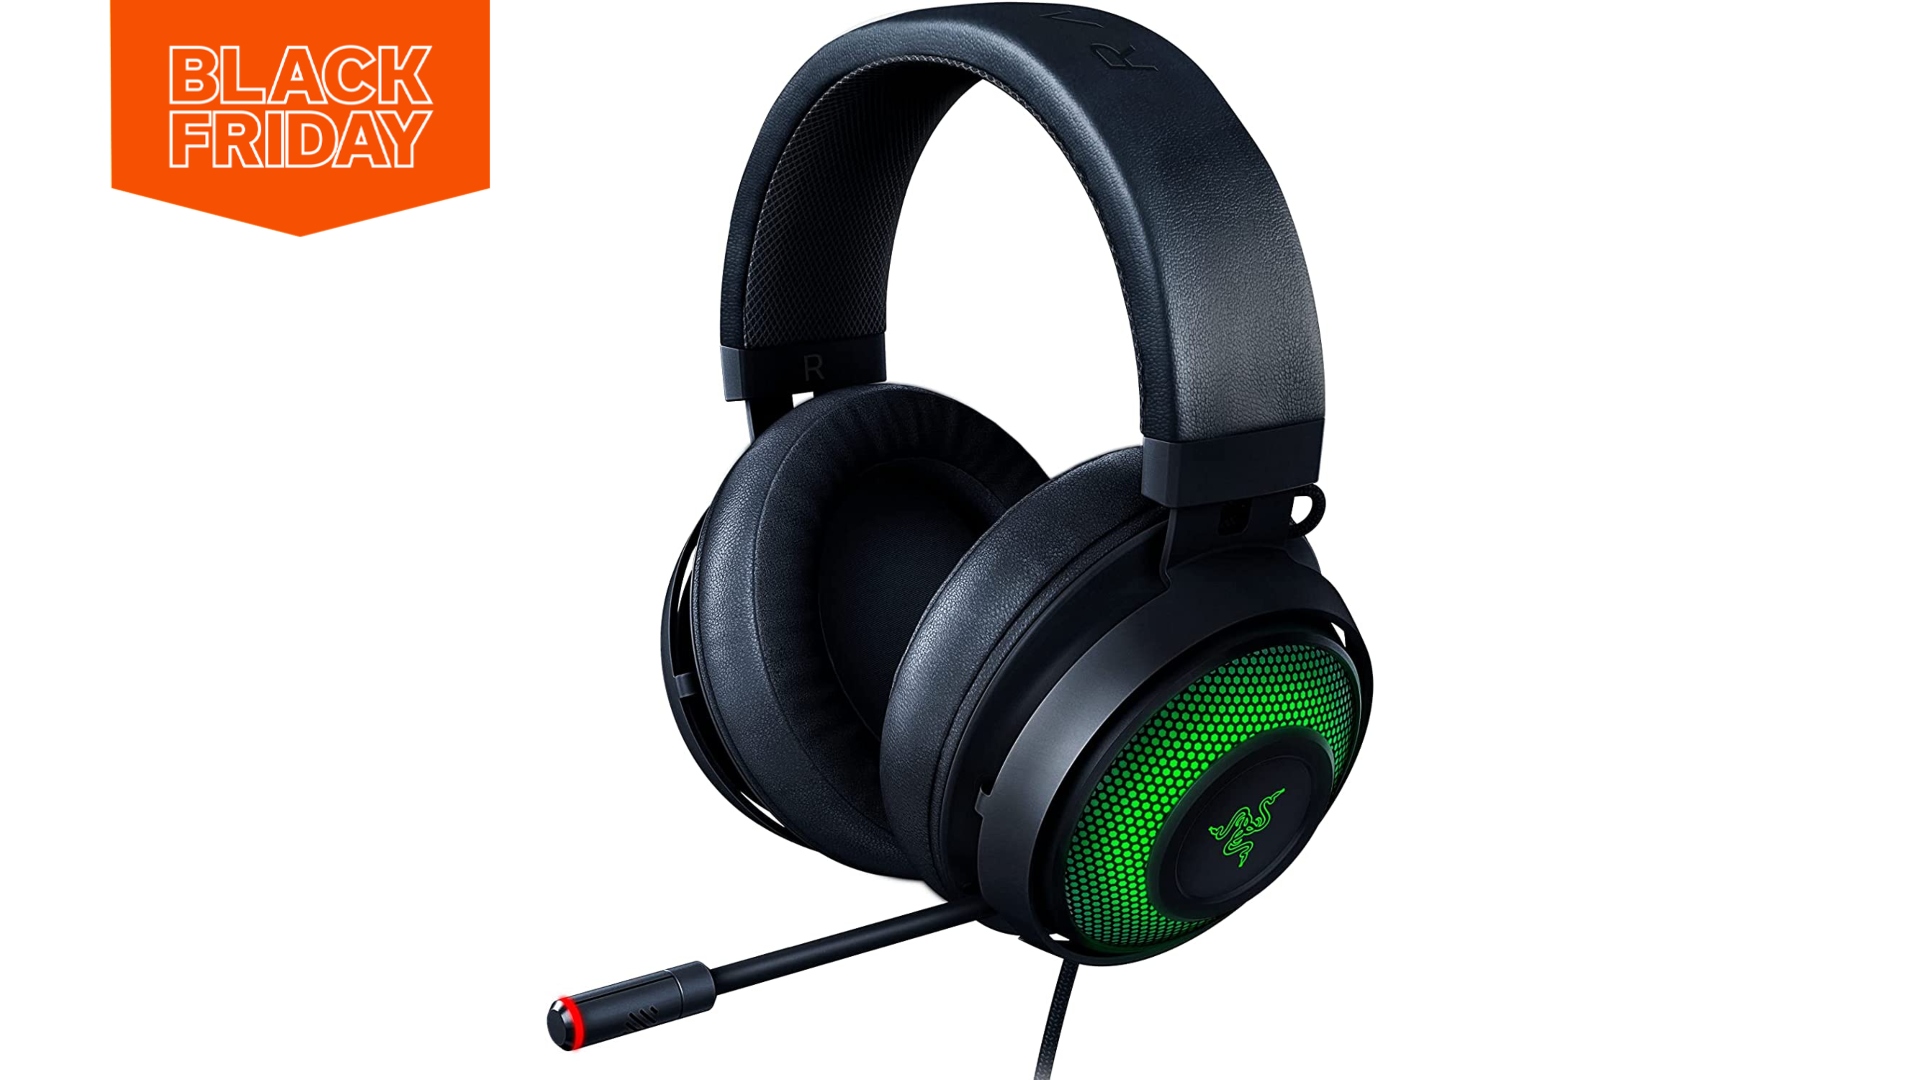 Save up to 54% on Razer Kraken Ultimate headsets this Black Friday